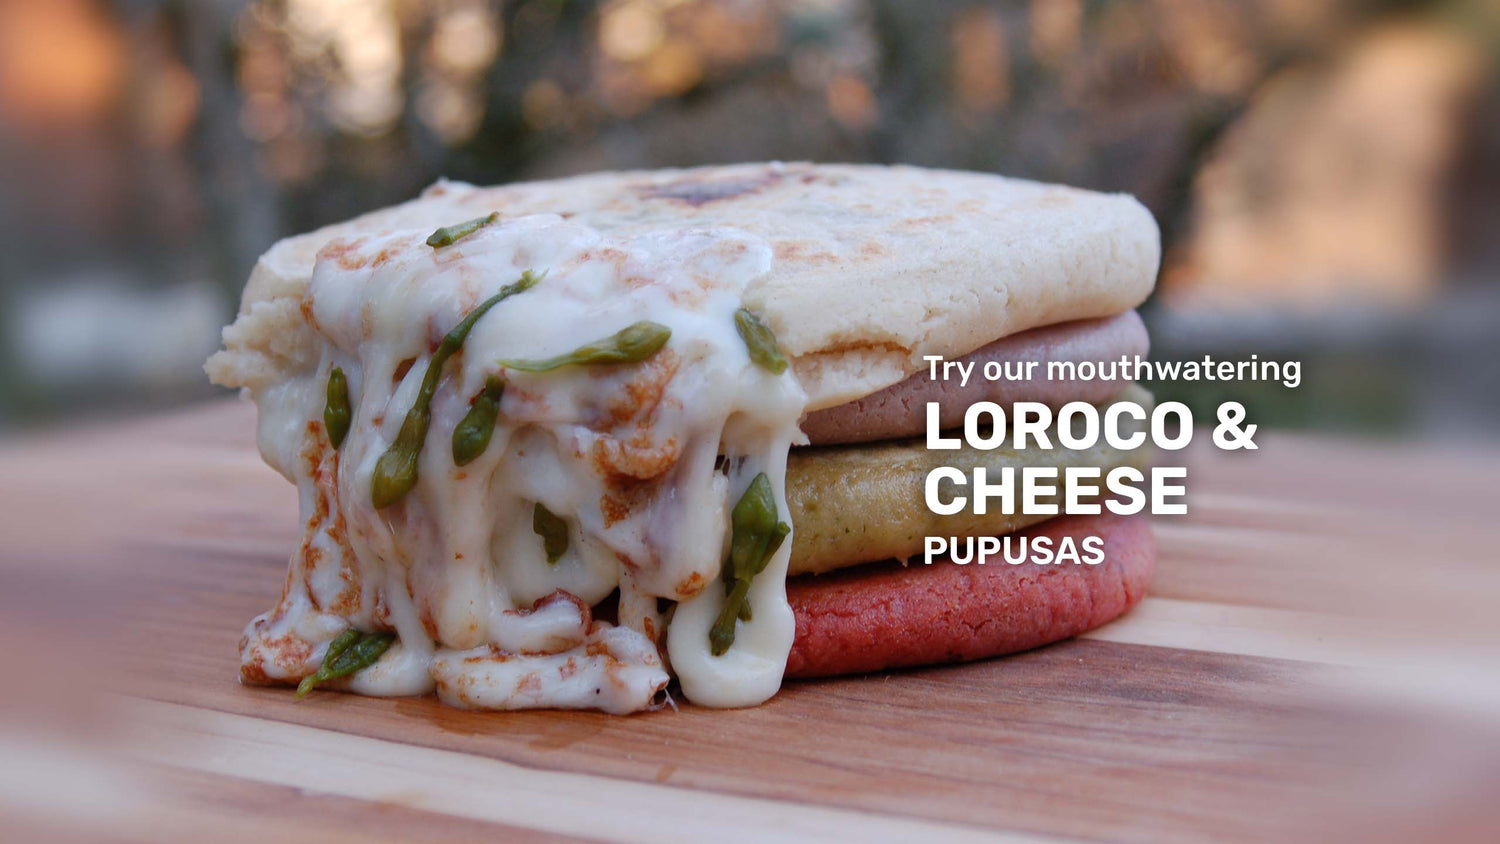 Xinca Foods. Try our mouthwatering Loroco and Cheese pupusa.